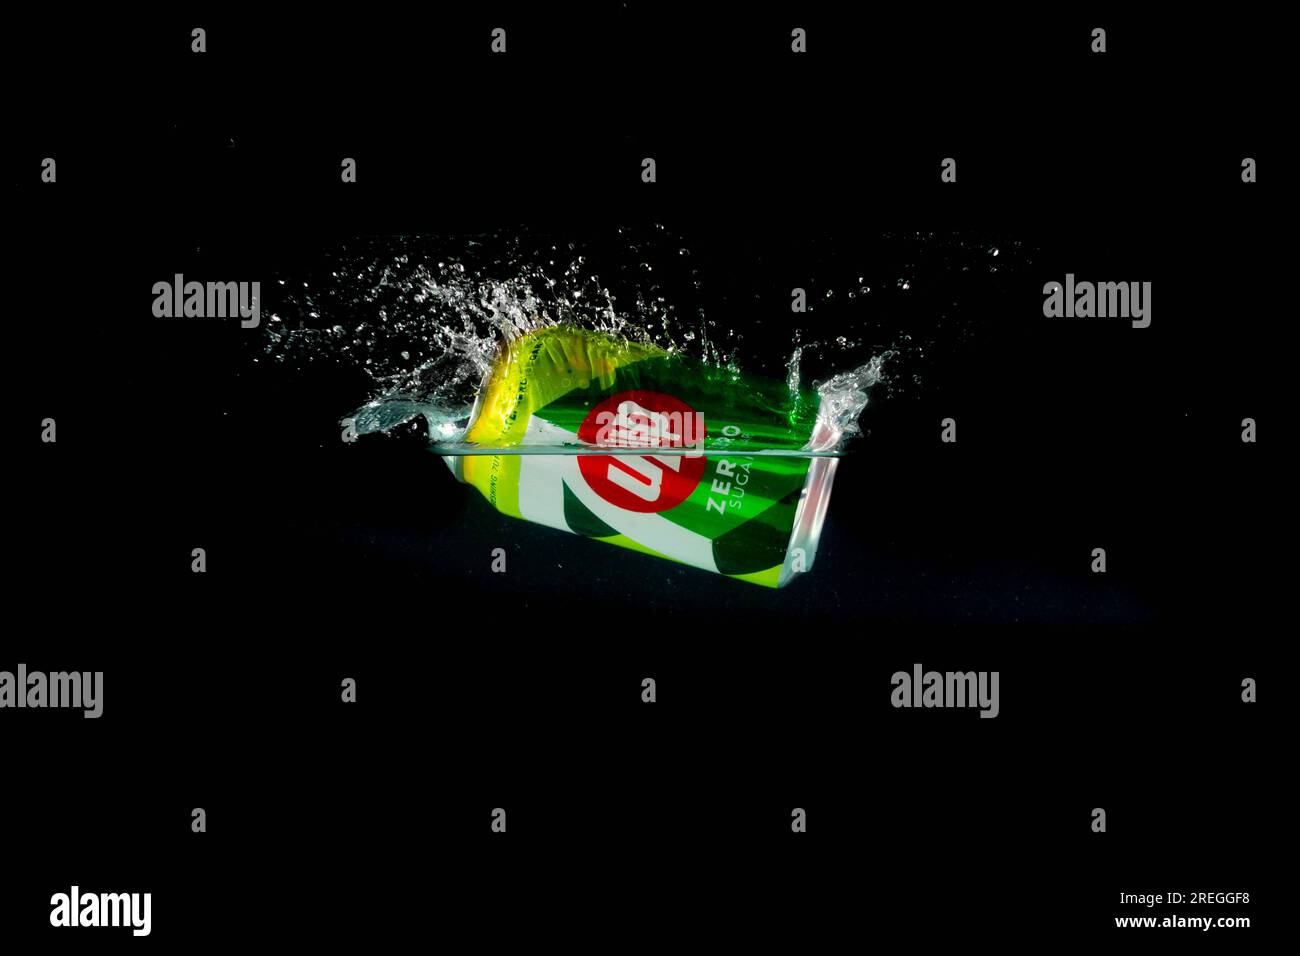 London, United Kingdom, 24th July 2023: A Can of 7Up splashing into water against a black background Stock Photo